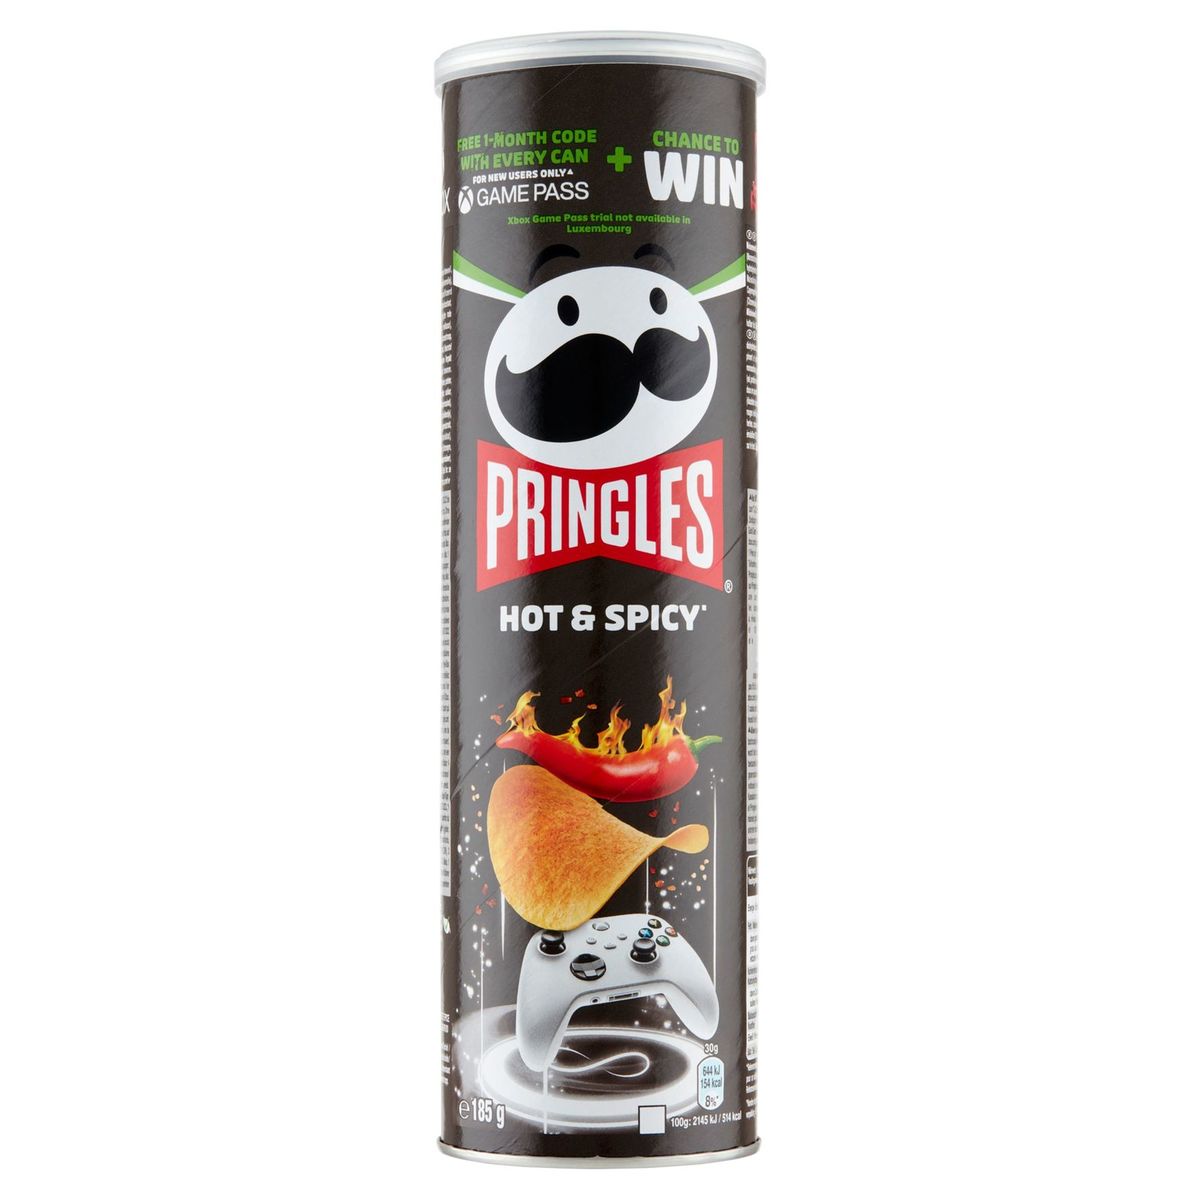 Pringles Hot & Spicy Chips 185 g